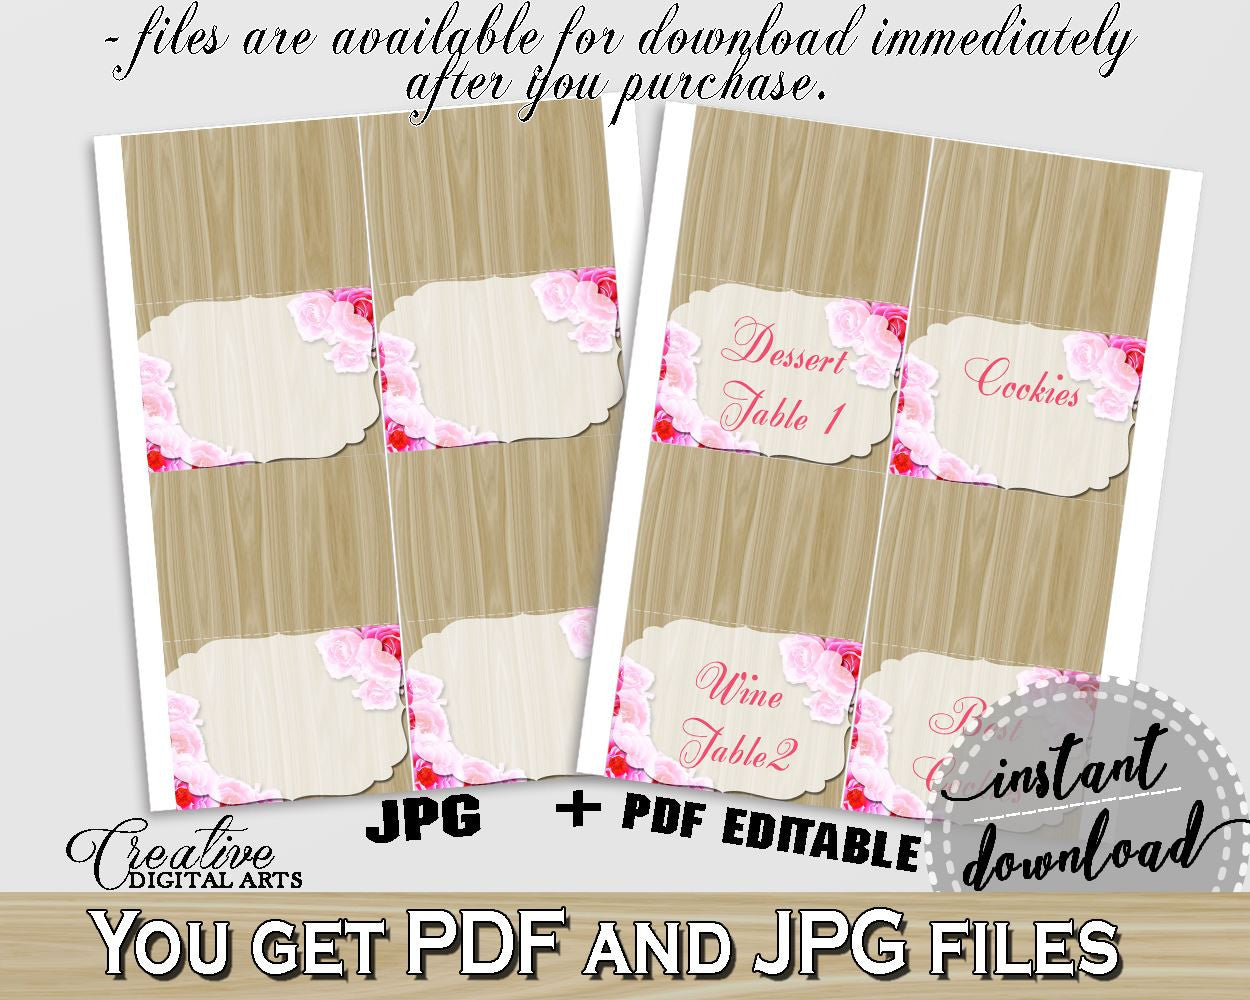 Pink And Beige Roses On Wood Bridal Shower Theme: Food Tent - editable drink signs, couple shower, party supplies, party décor - B9MAI - Digital Product